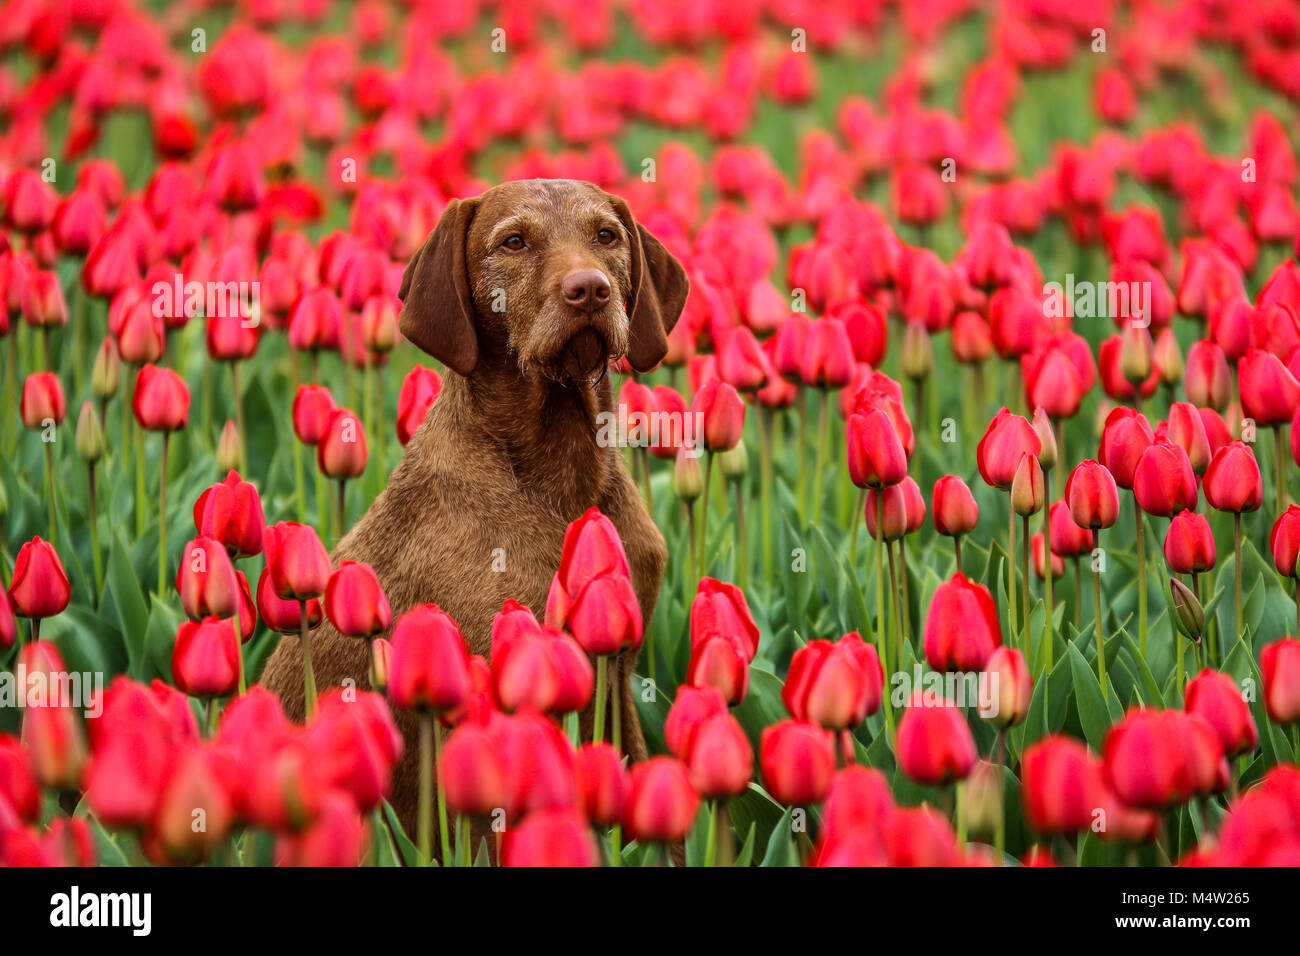 A picture from the amazing tulip fields in Netherlands during the cloudy, spring day. The dog is sitting in the field and enjoying the view. Stock Photo